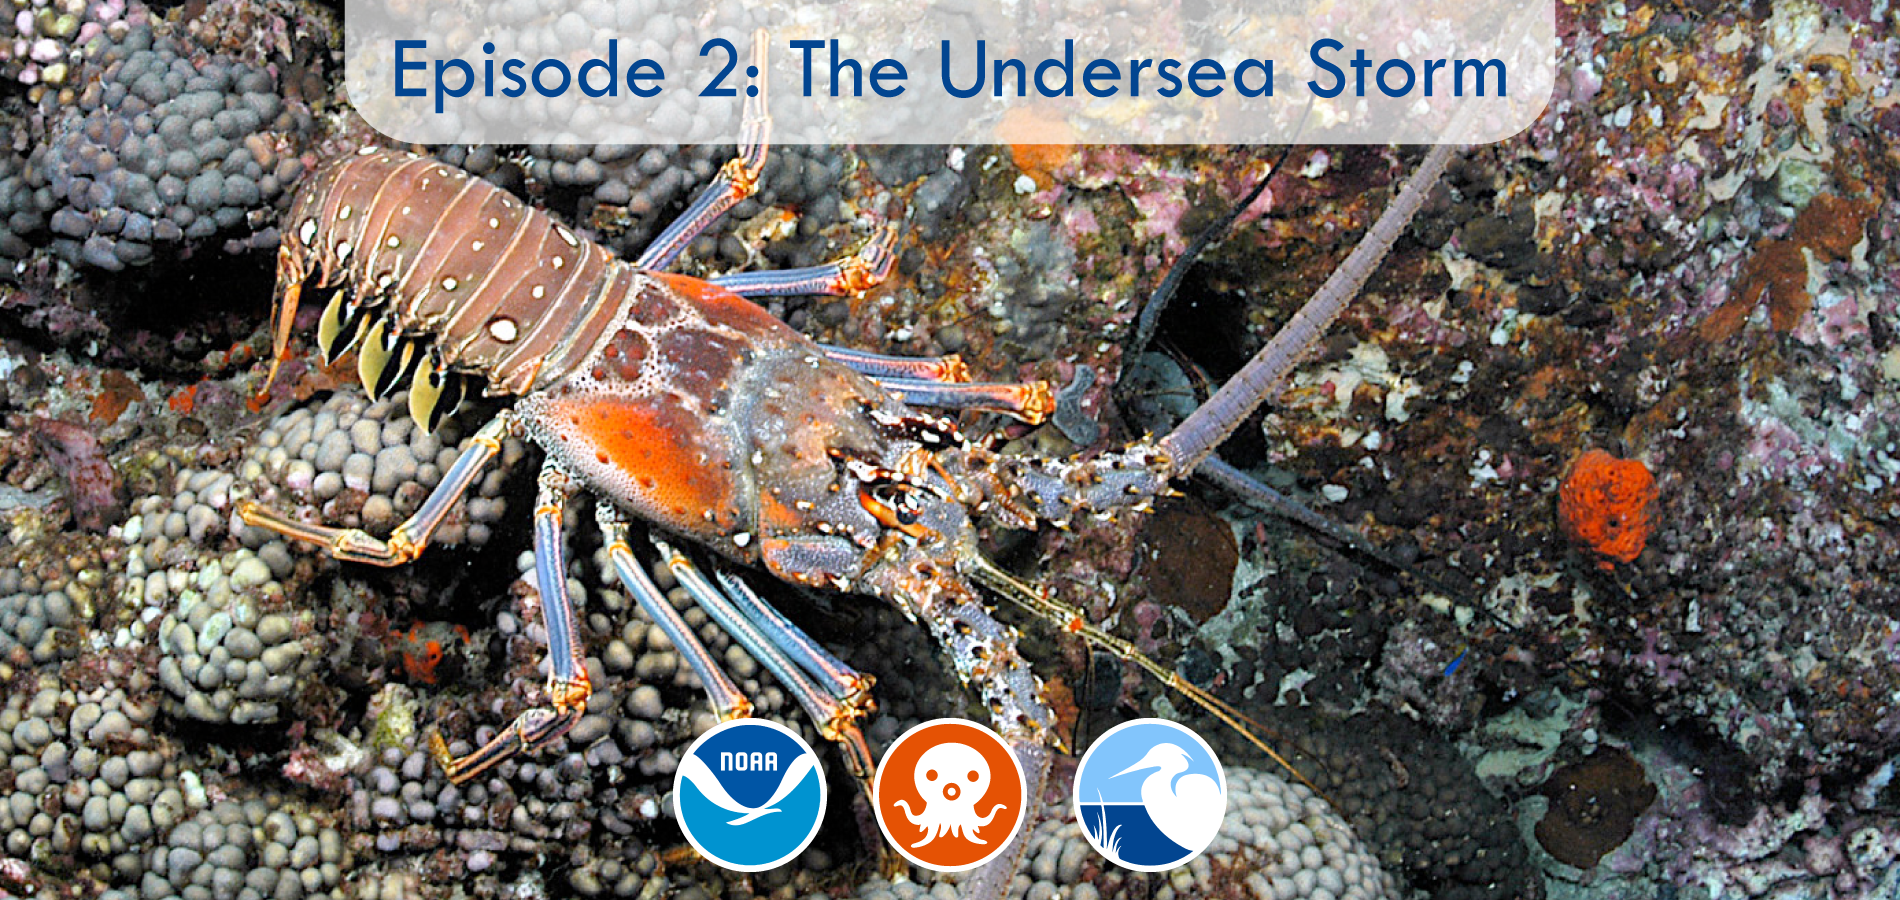 A Caribbean spiny lobster crawls along the ocean floor. The banner says "Episode 2: The Undersea Storm" and has the NOAA logo, the Octonauts logo, and the Coastal Ecosystem Learning Center (CELC) network logo.